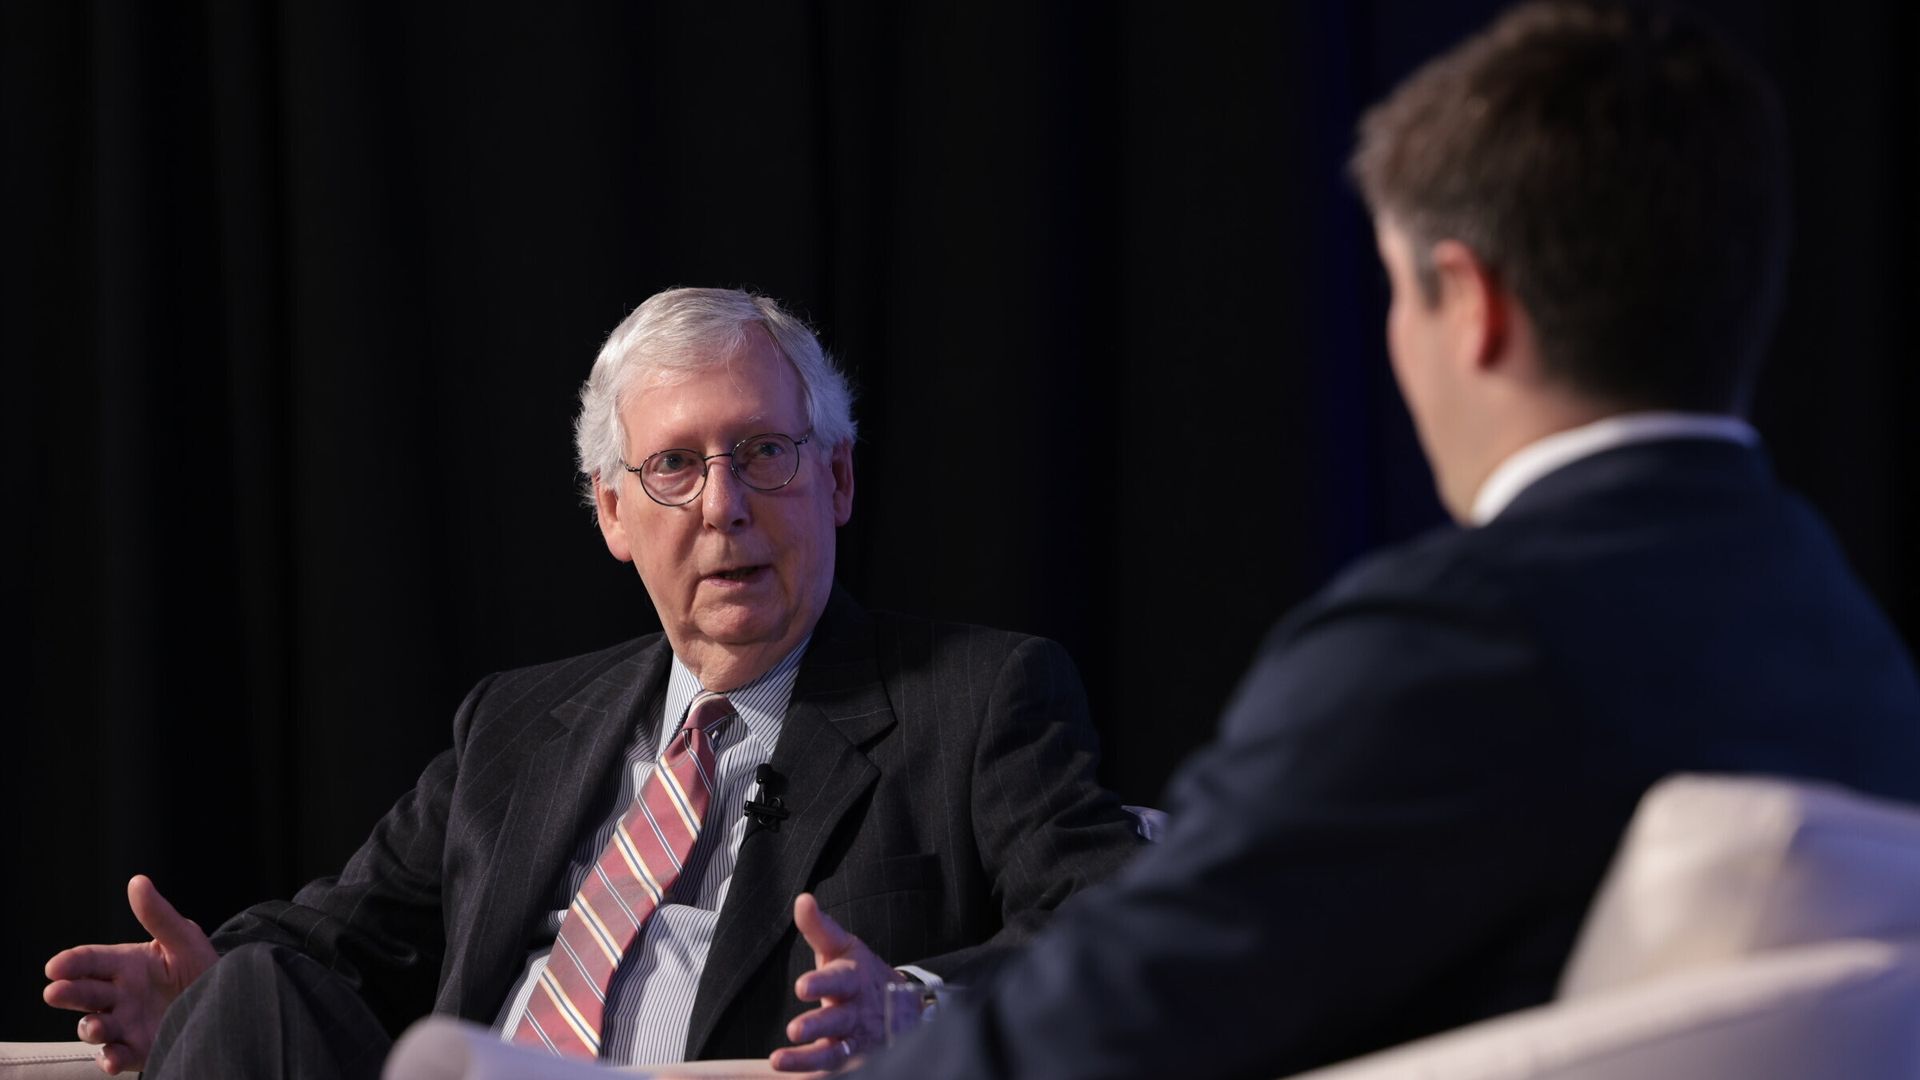 McConnell on stage being interviewed by Jonathan Swan